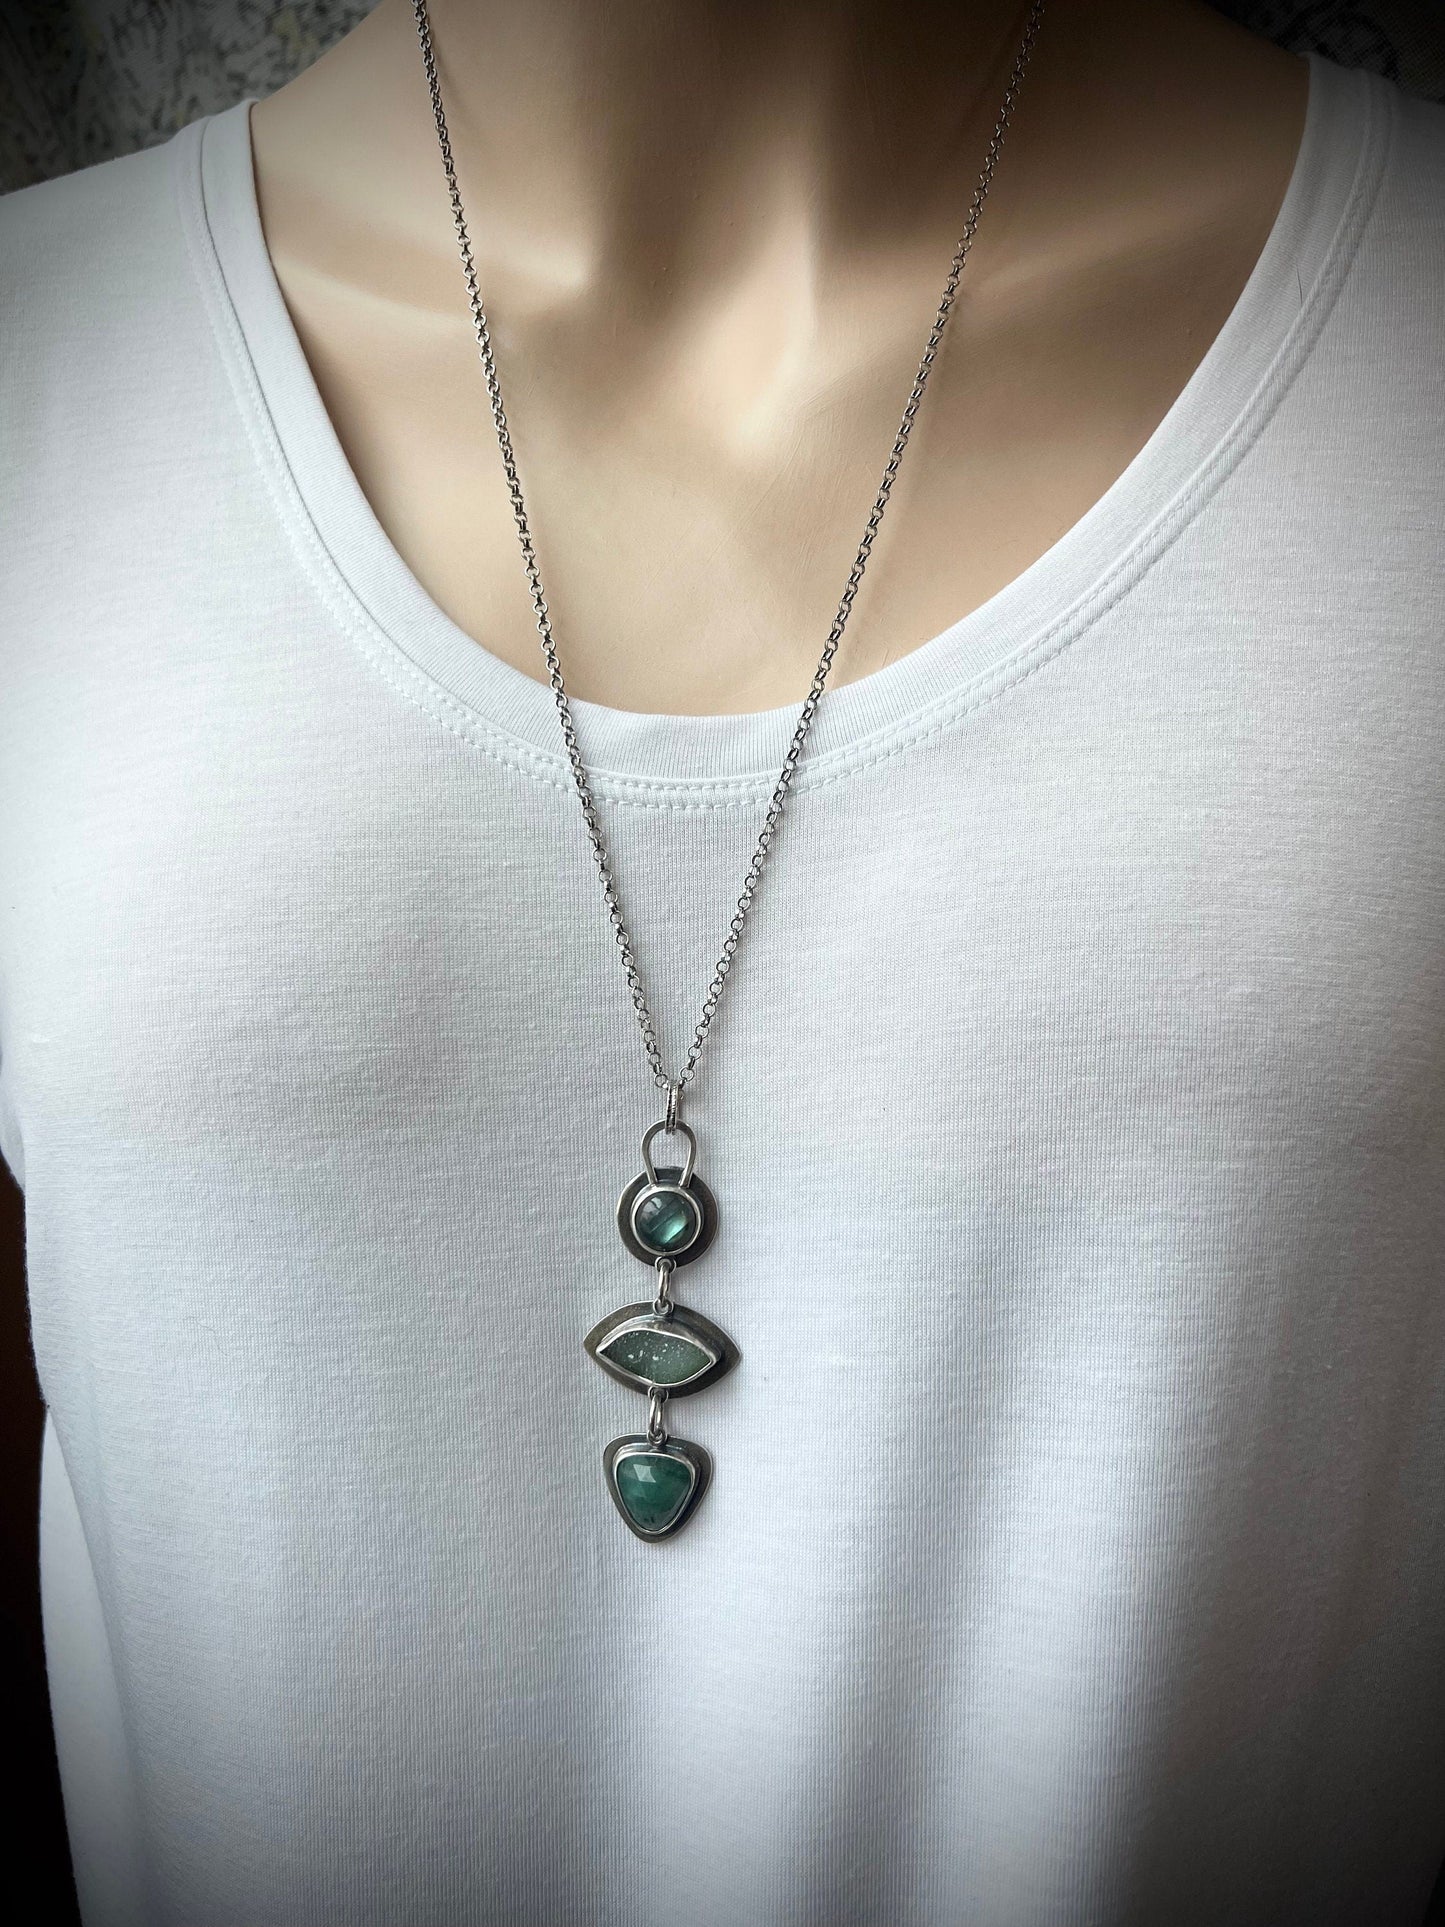 SOLD Sterling Silver Labradorite, Druzy, and Emerald Necklace - Handmade One-of-a-kind Pendant on Sterling Silver Chain